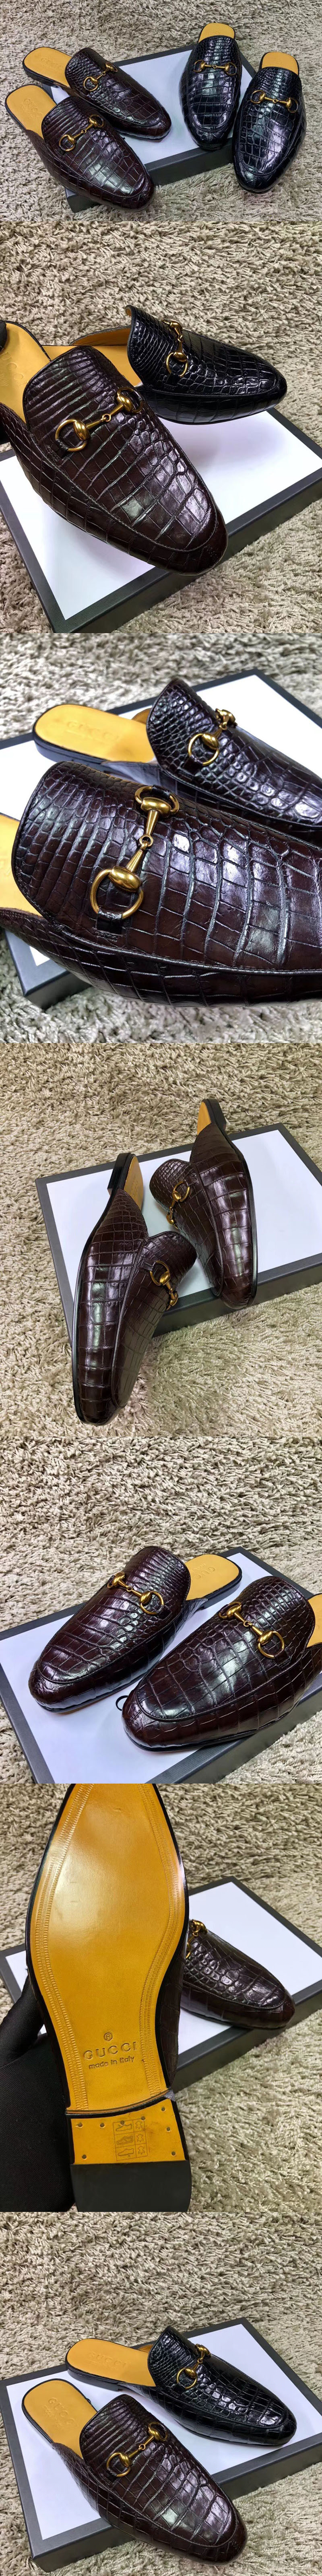 Replica Gucci ‎426219 Leather Horsebit slipper and shoes Brown Real Crocodile Leather